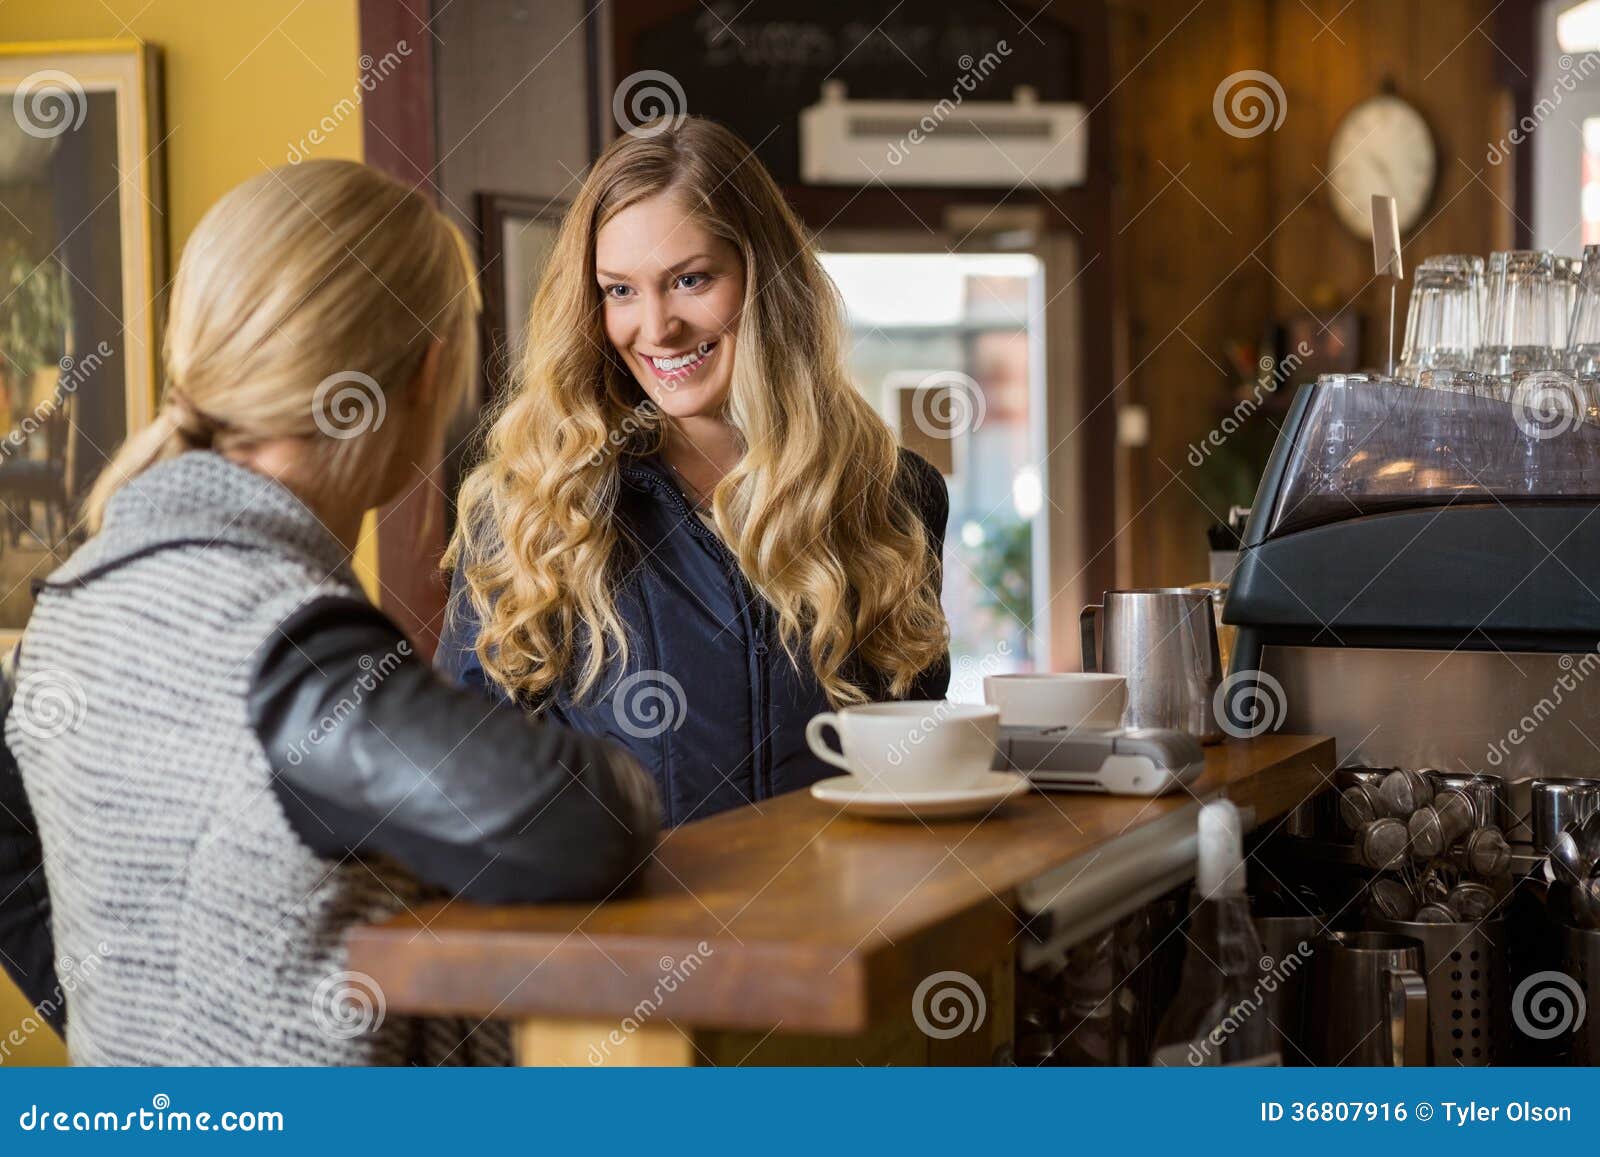 Female Friends Conversing By Counter Stock Photo Image Of Beautiful People